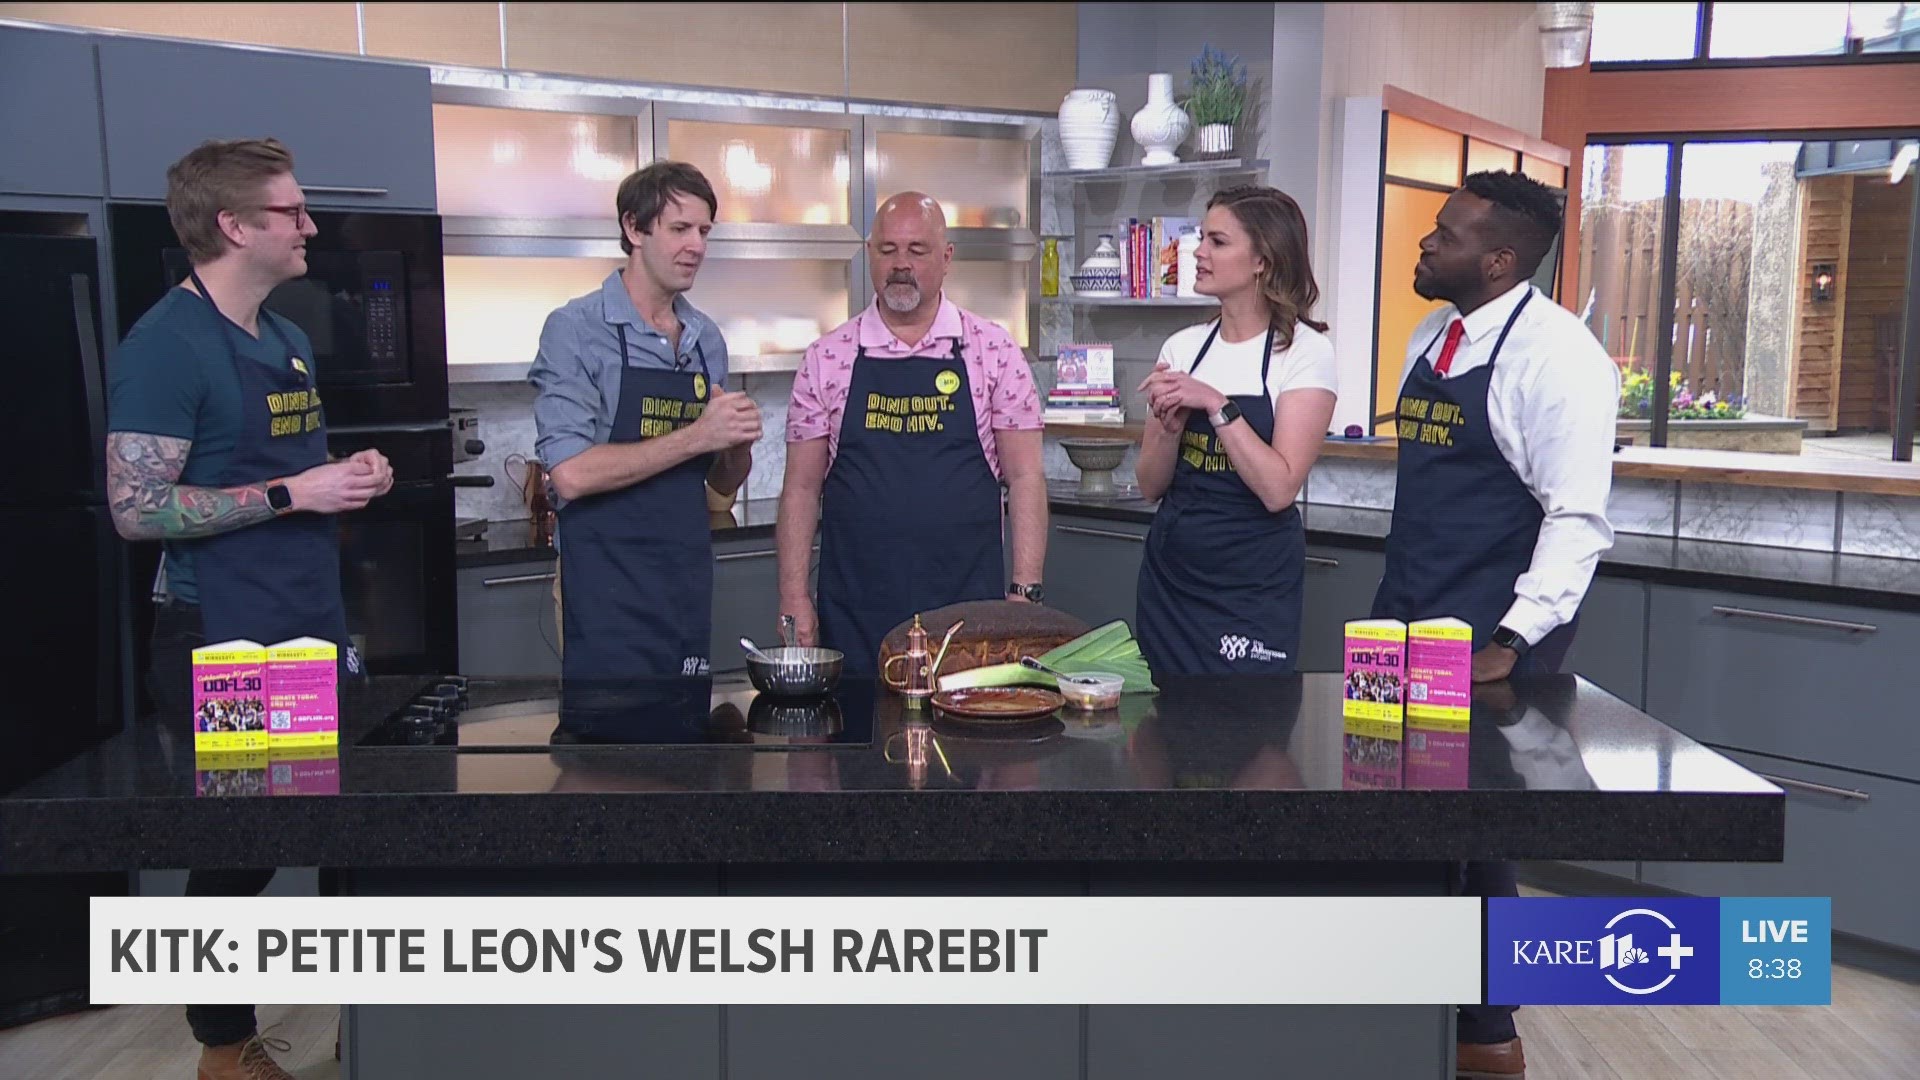 Alicia welcomes Rhett and Ben from Petite León, who are whipping up Welsh Rarebit in advance of Dining Out For Life. The event takes place April 25.